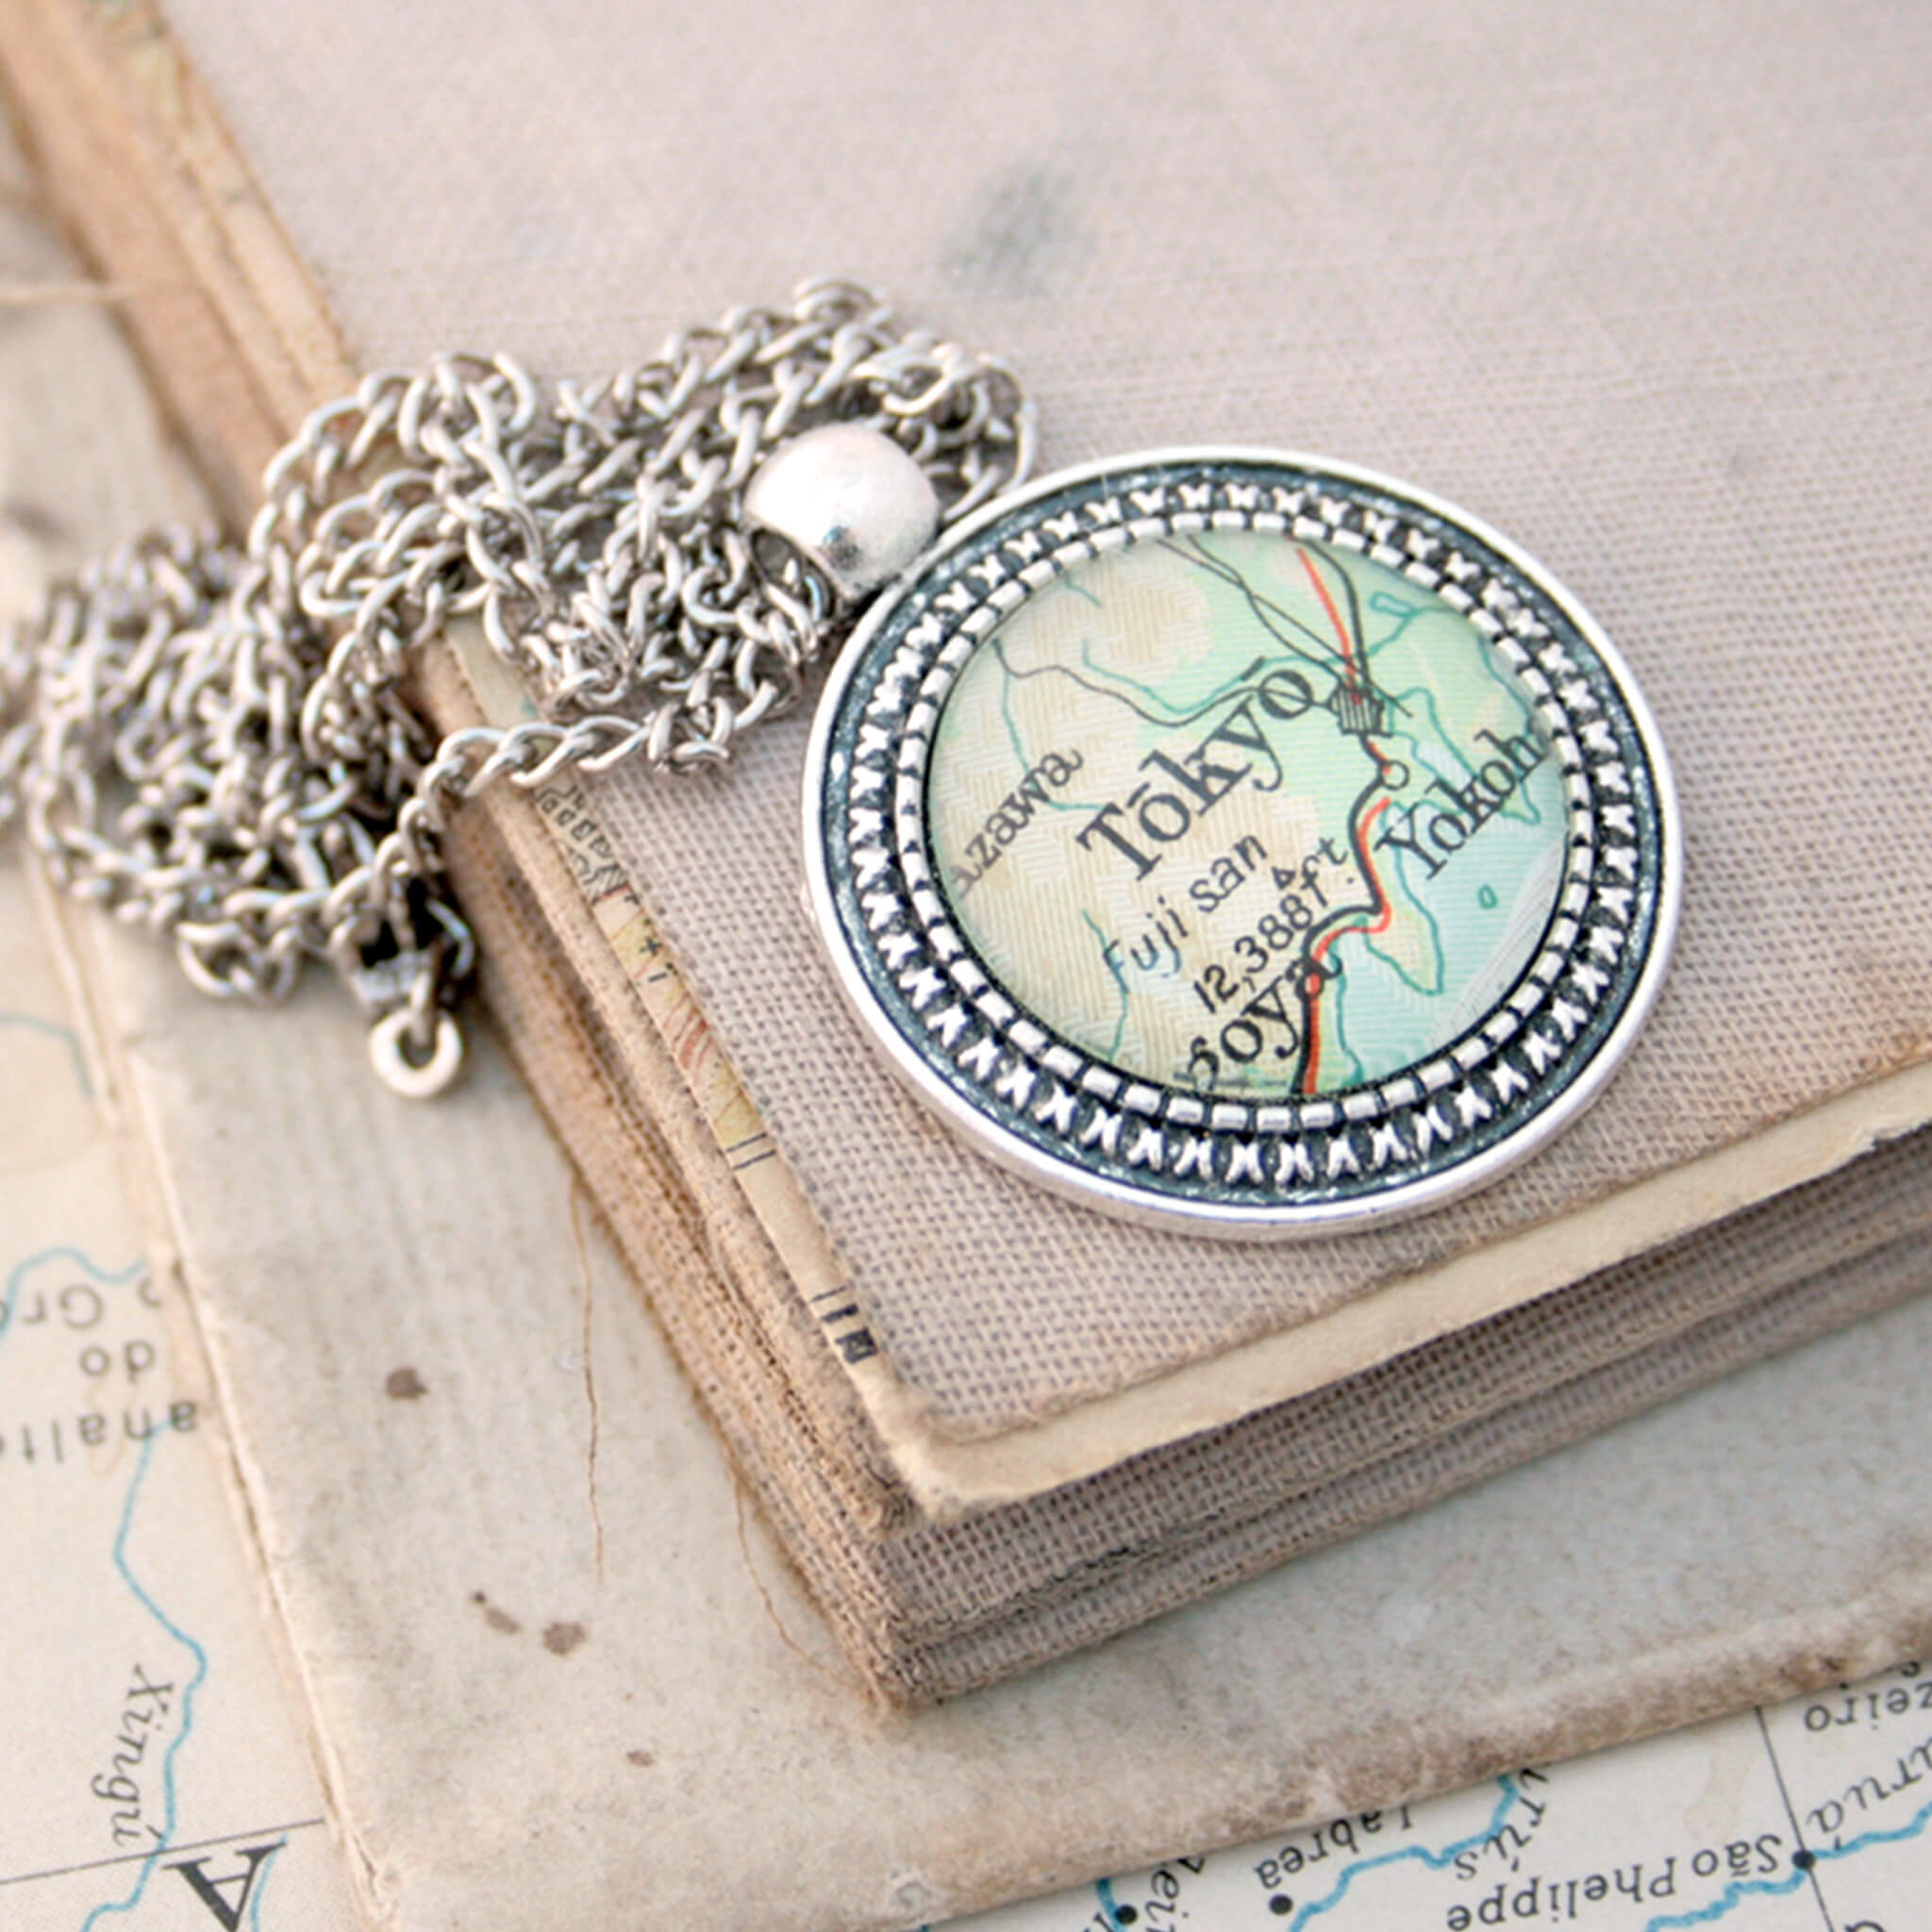 Silver coloured pendant necklace with map of Tokyo